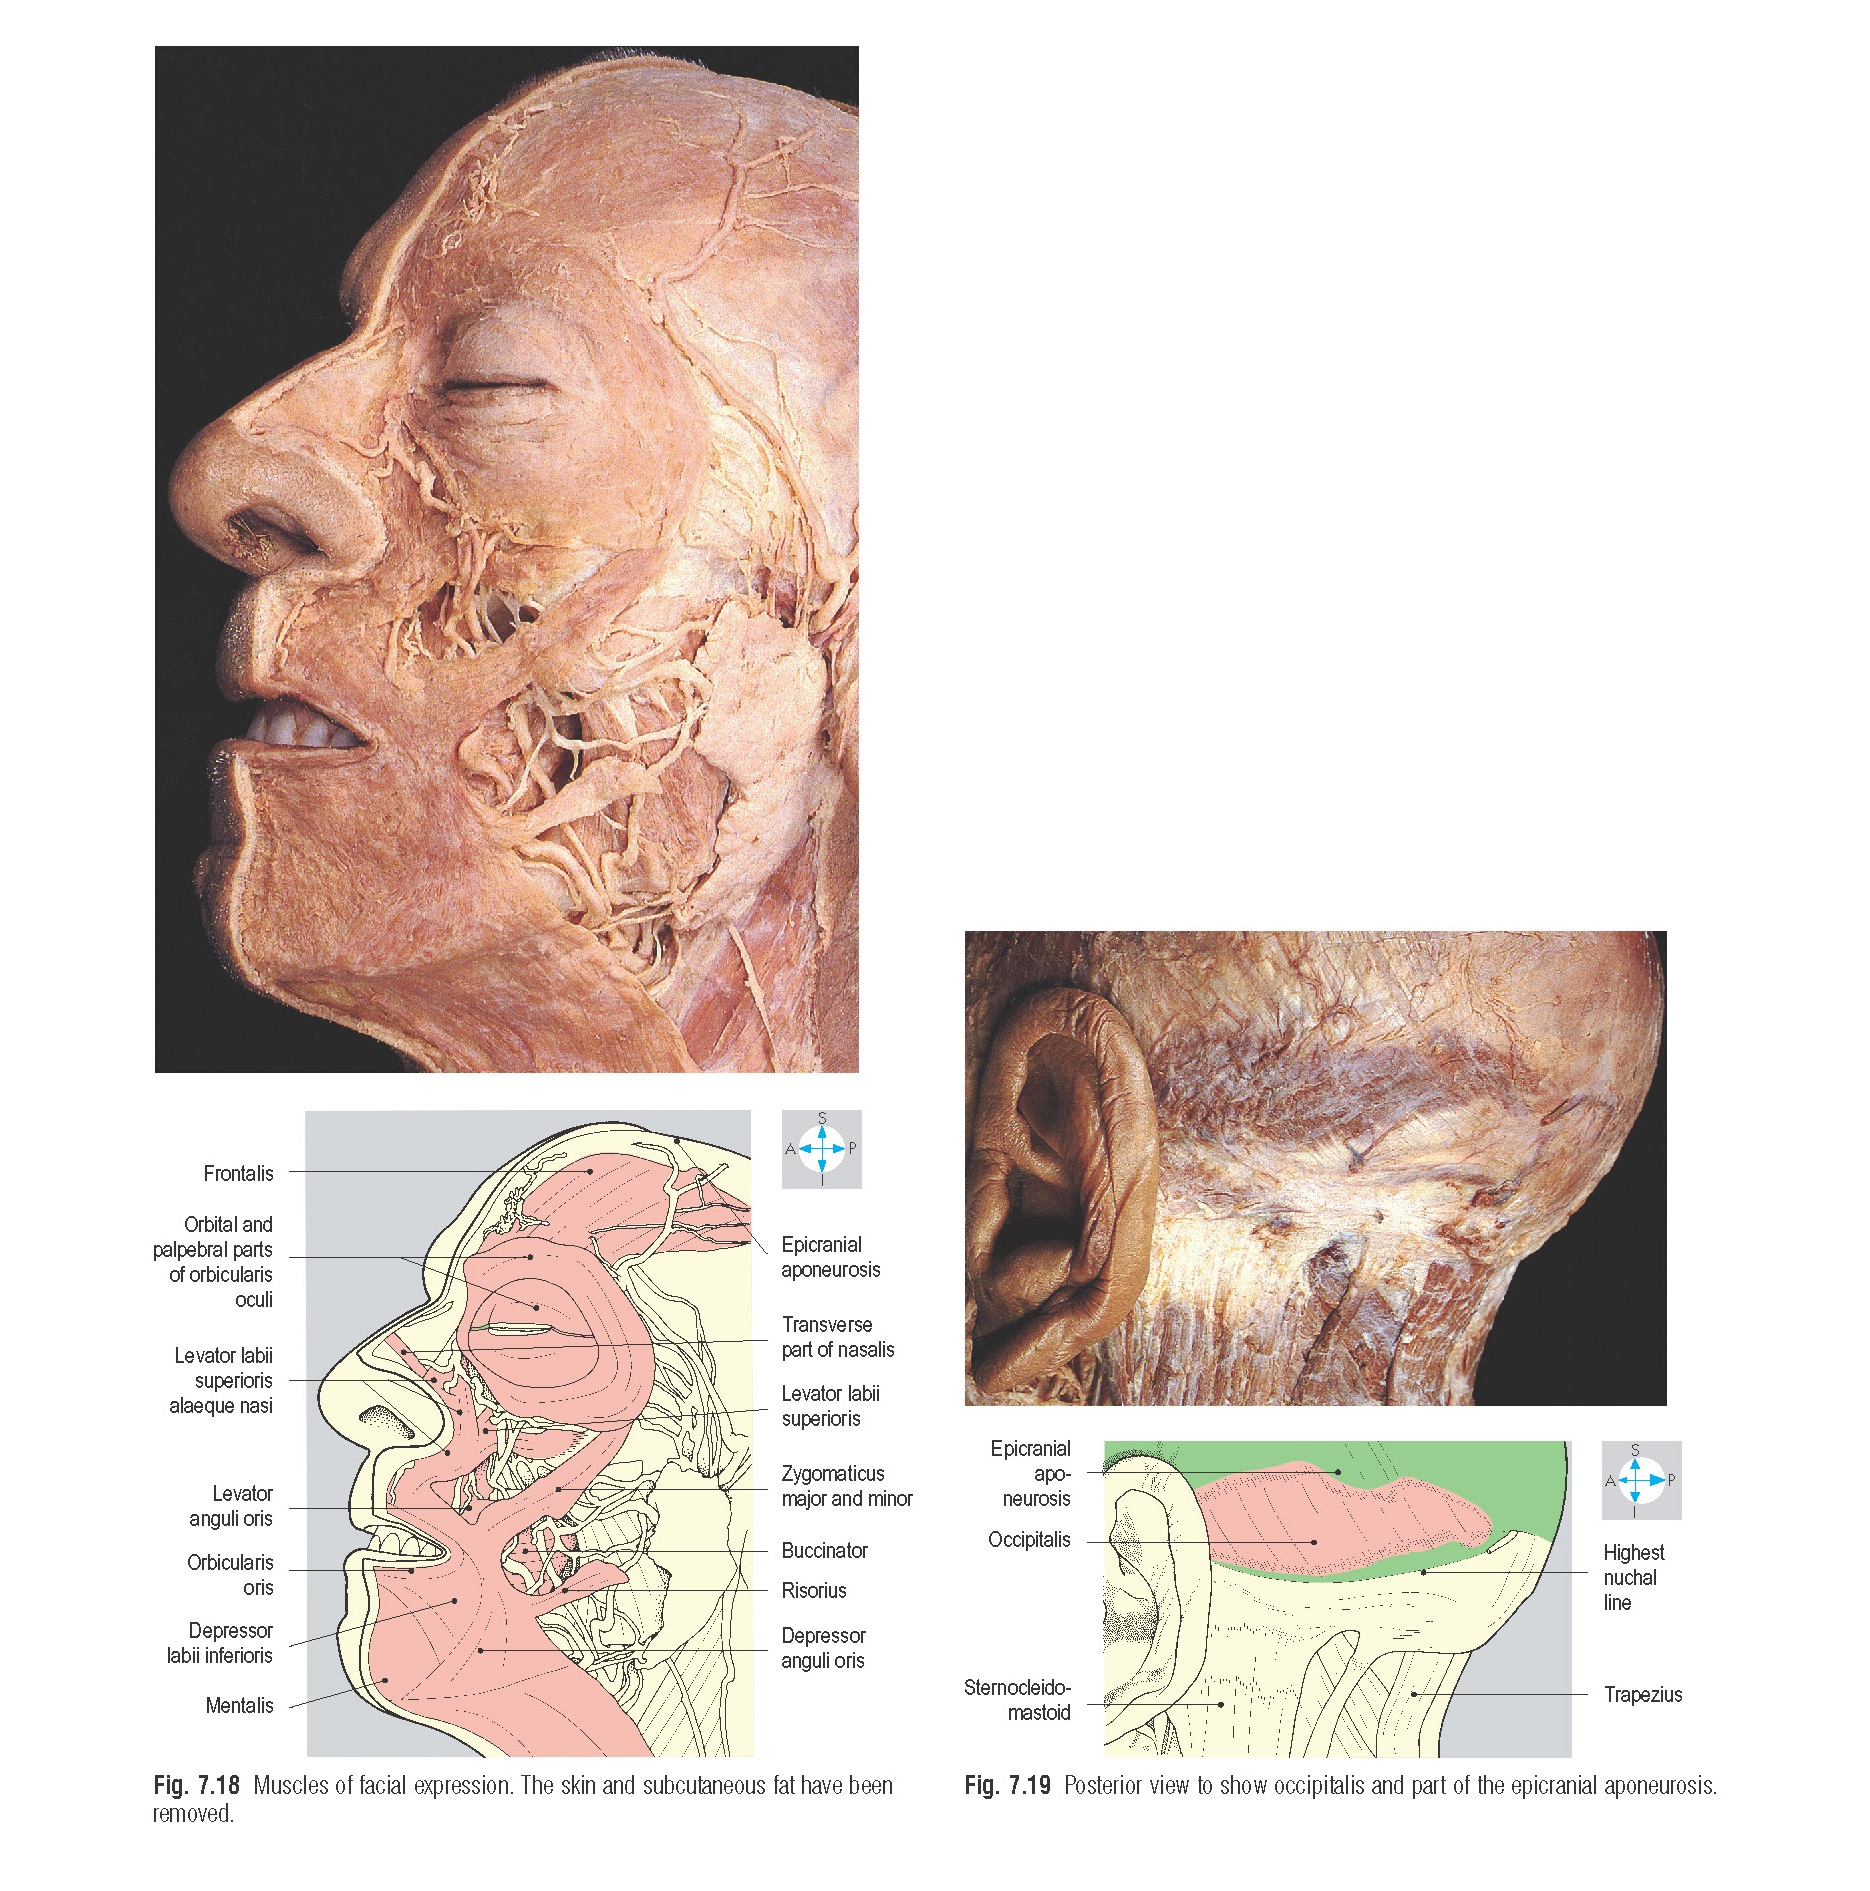 Muscles of facial expression. The skin and subcutaneous fat have been removed.